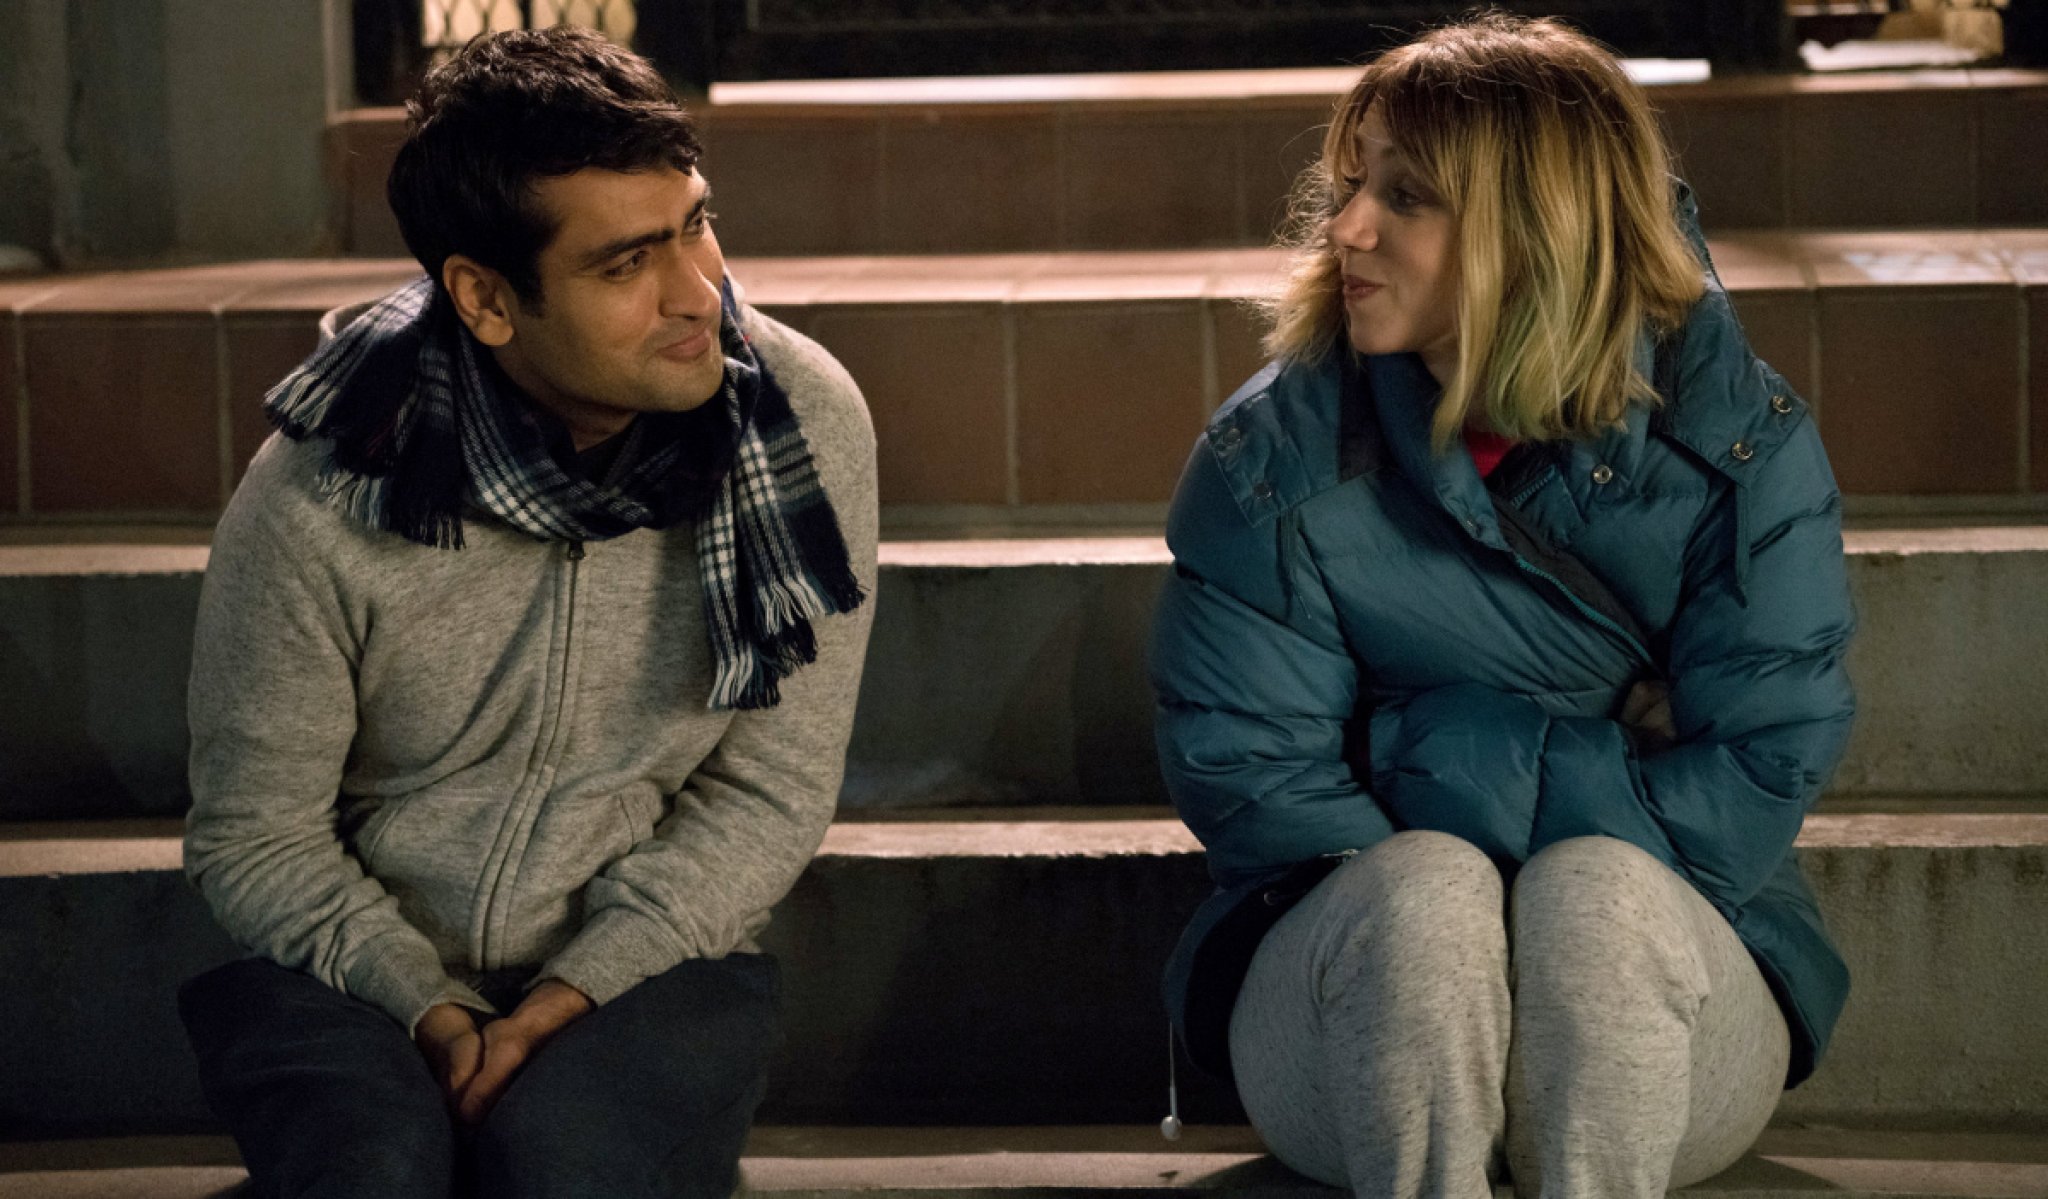 Kumail Nanjiana and Zoe Kazan from the movie, The Big Sick, sit on stairs outside together.